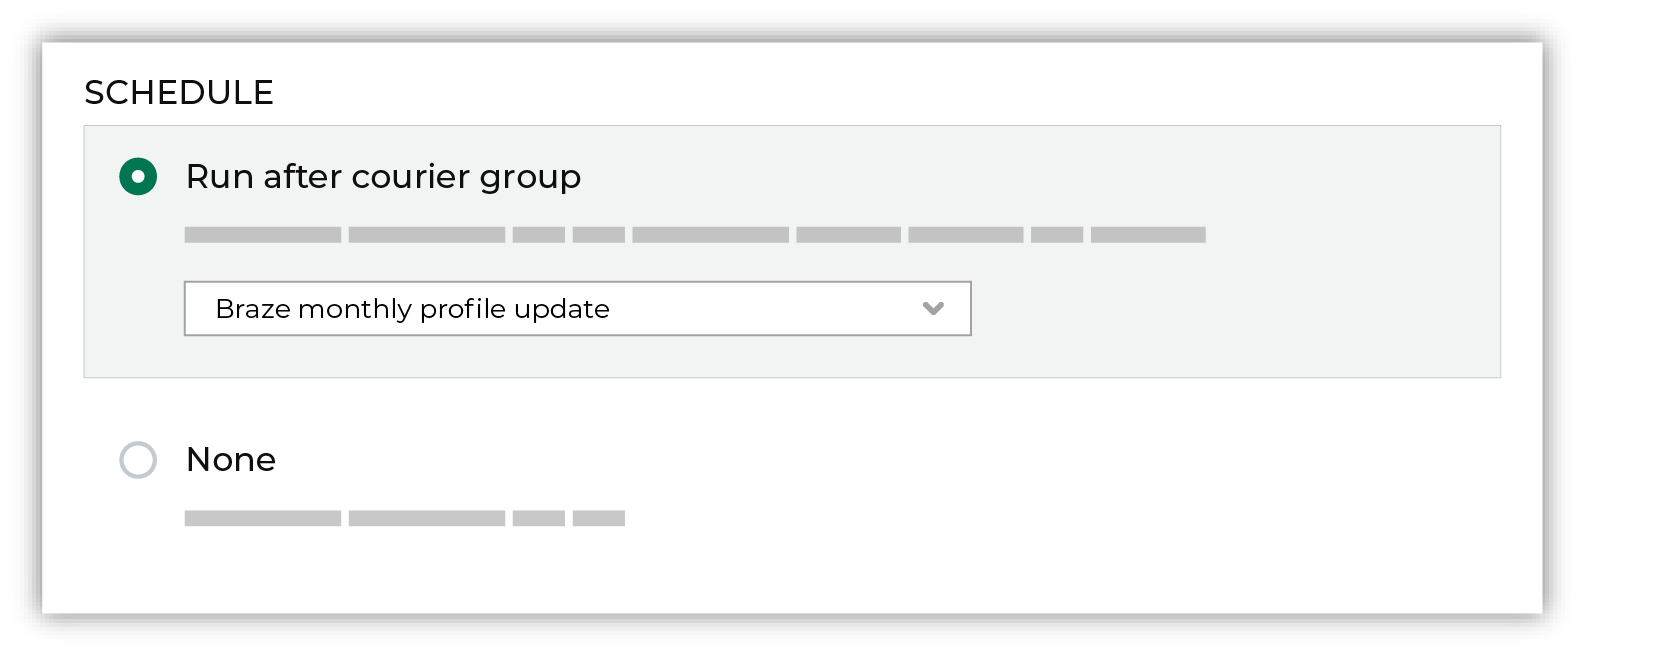 Configure an endpoint to regenerate after a courier group run.